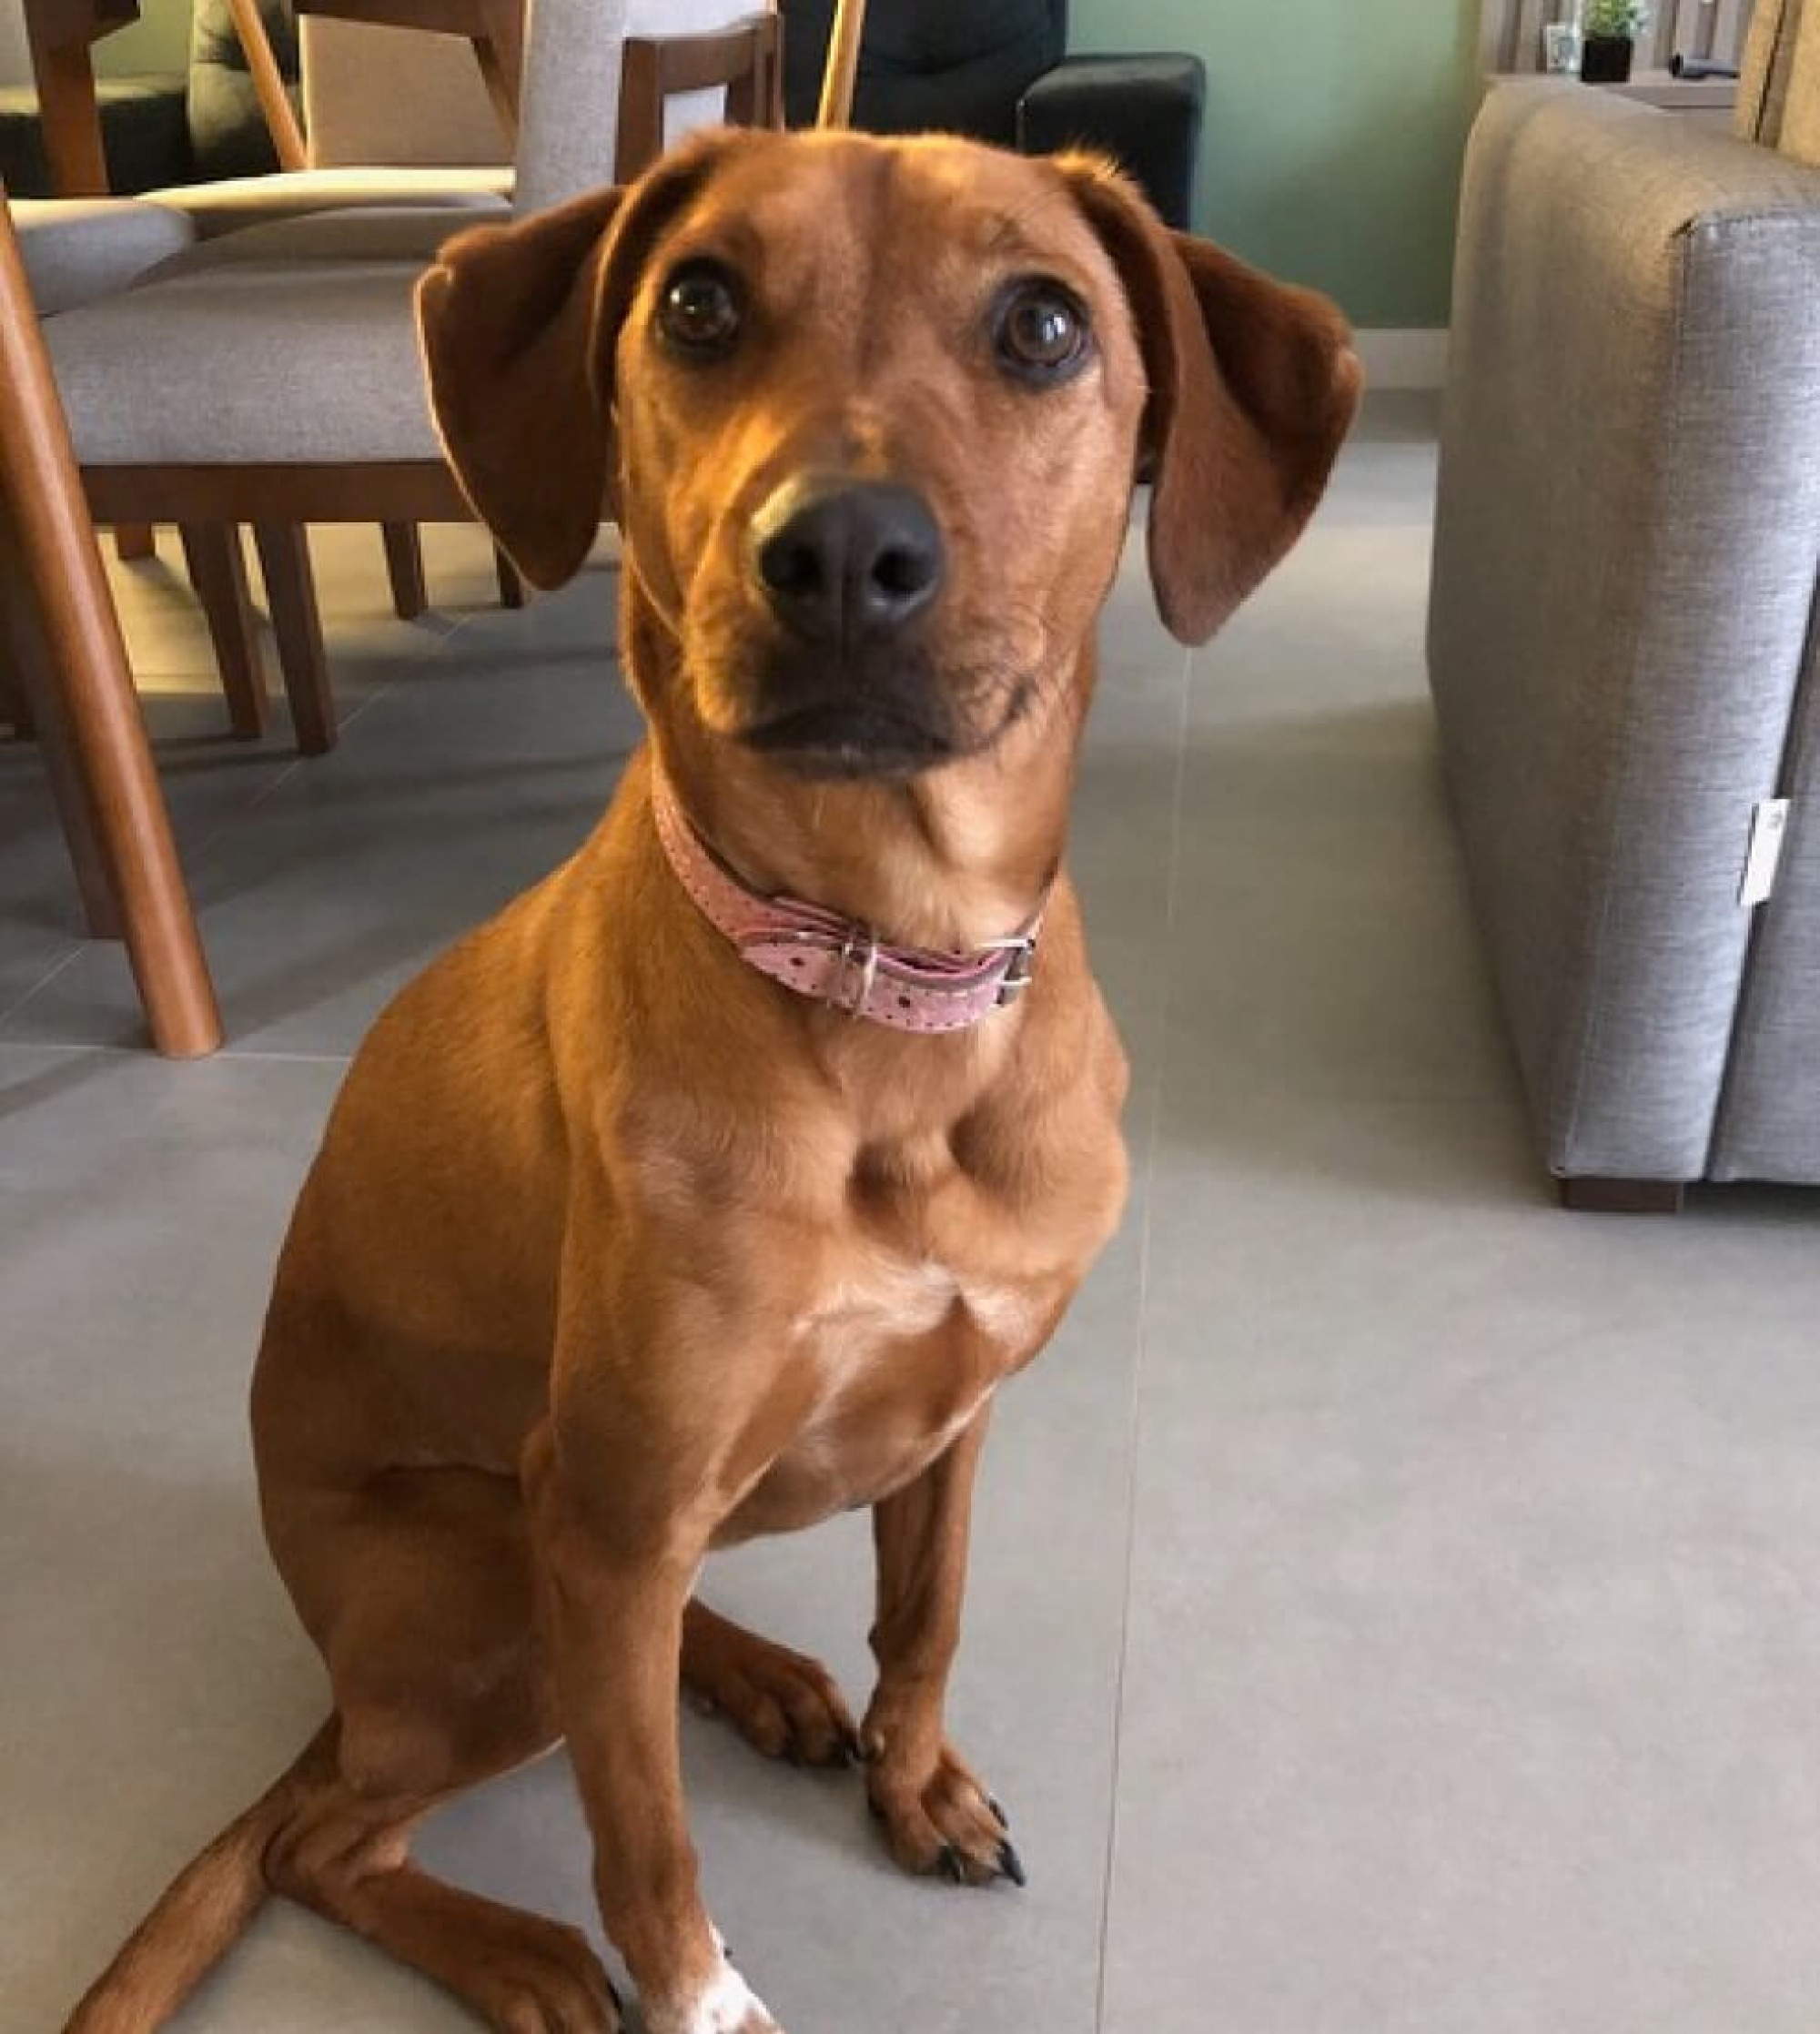 A brown dog demonstrating its obedience by sitting patiently